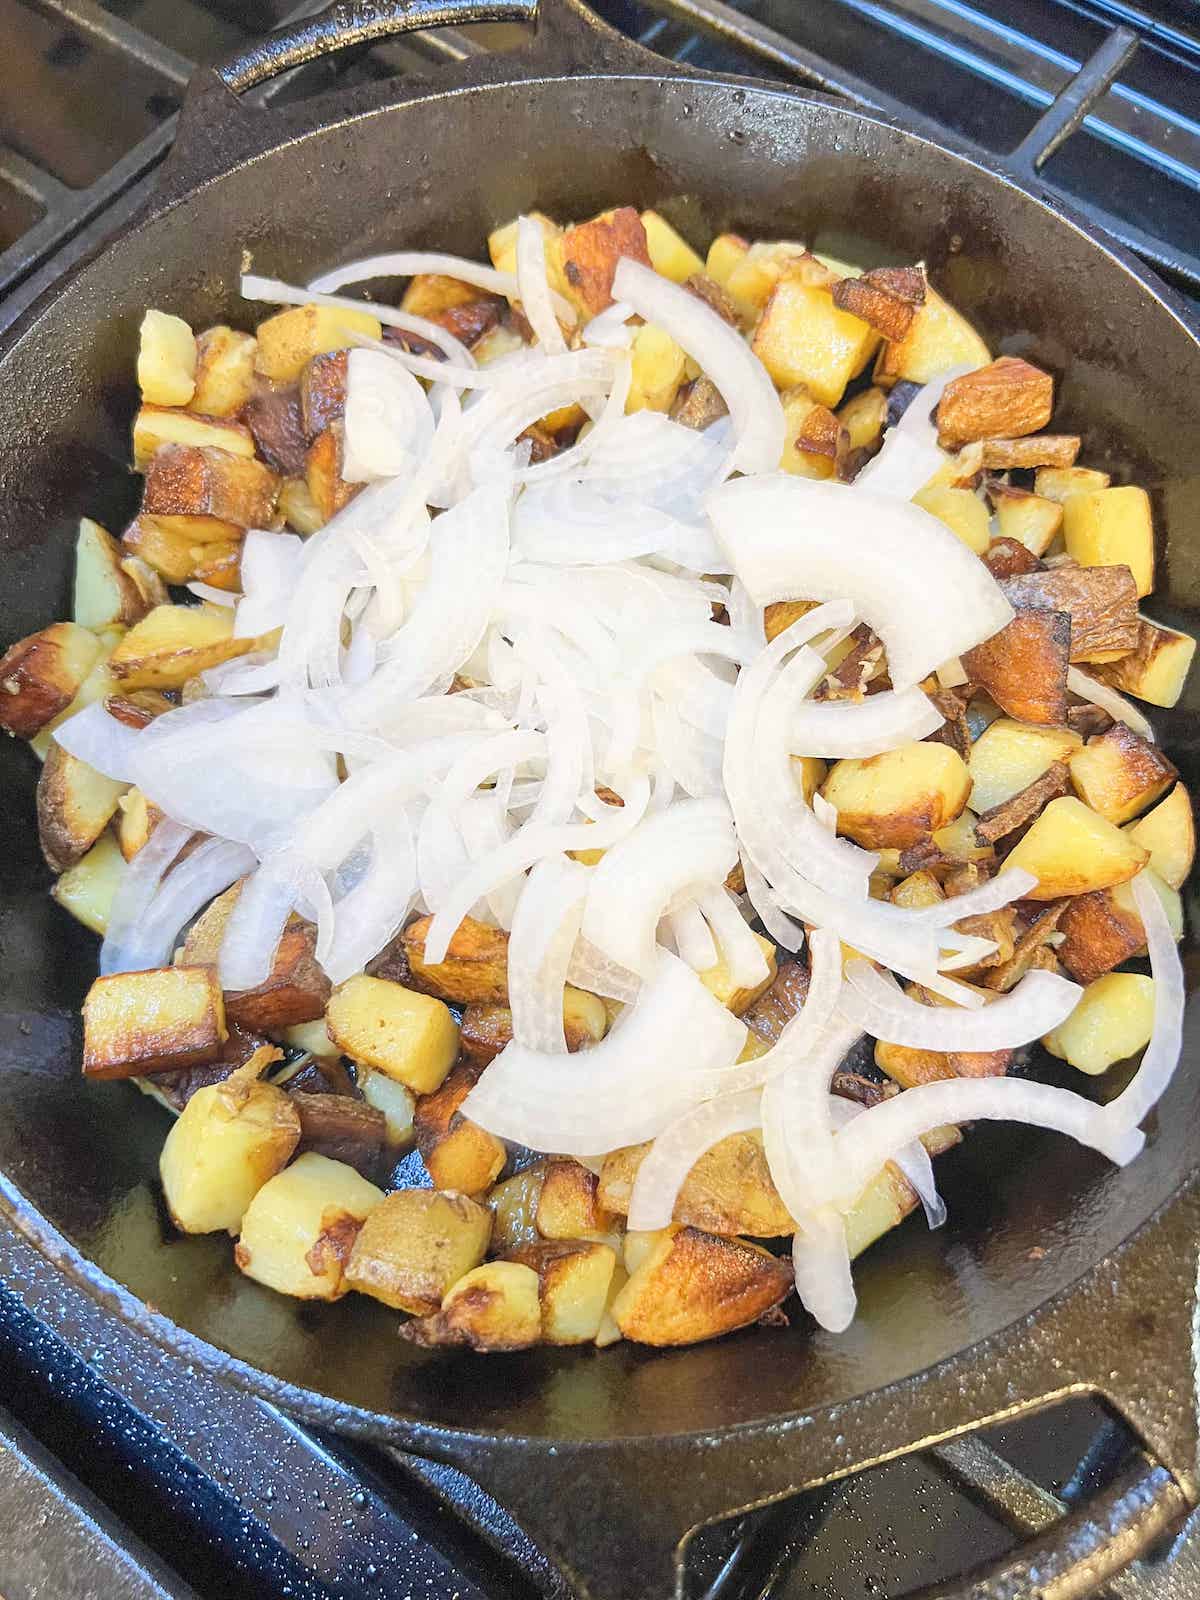 Golden brown cubed potatoes with thinly sliced white onion on top in a cast iron skillet.